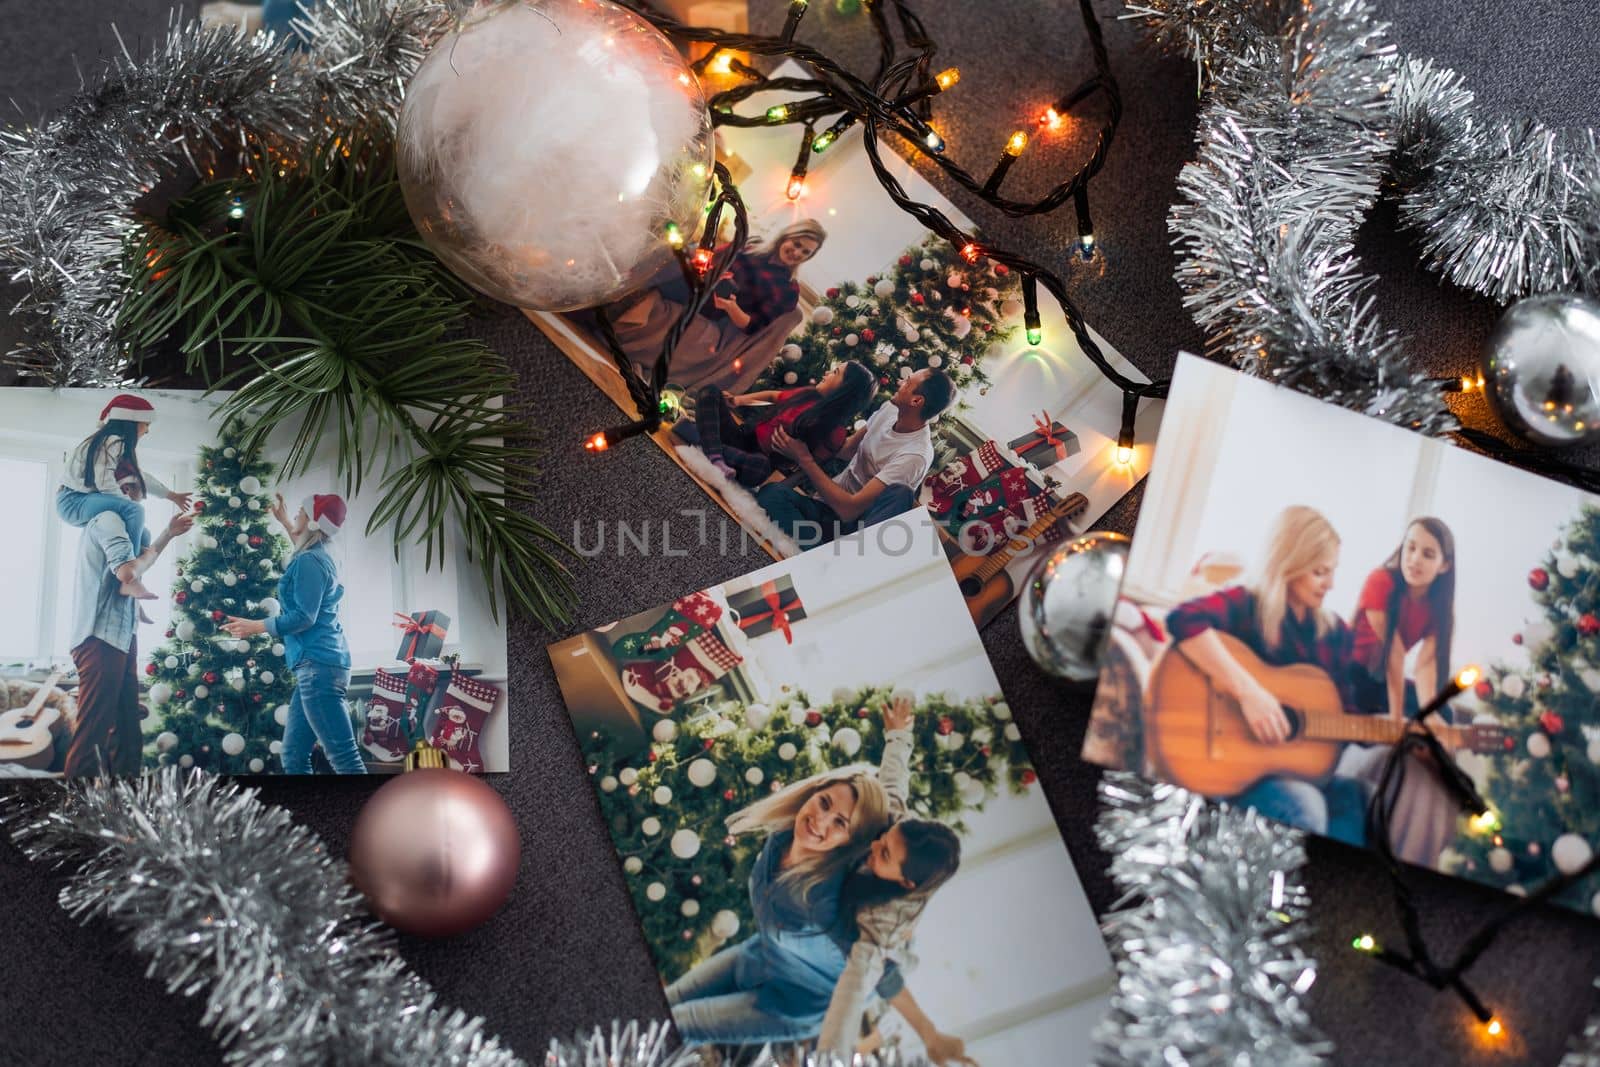 Photos of family against Christmas lights decor background by Andelov13